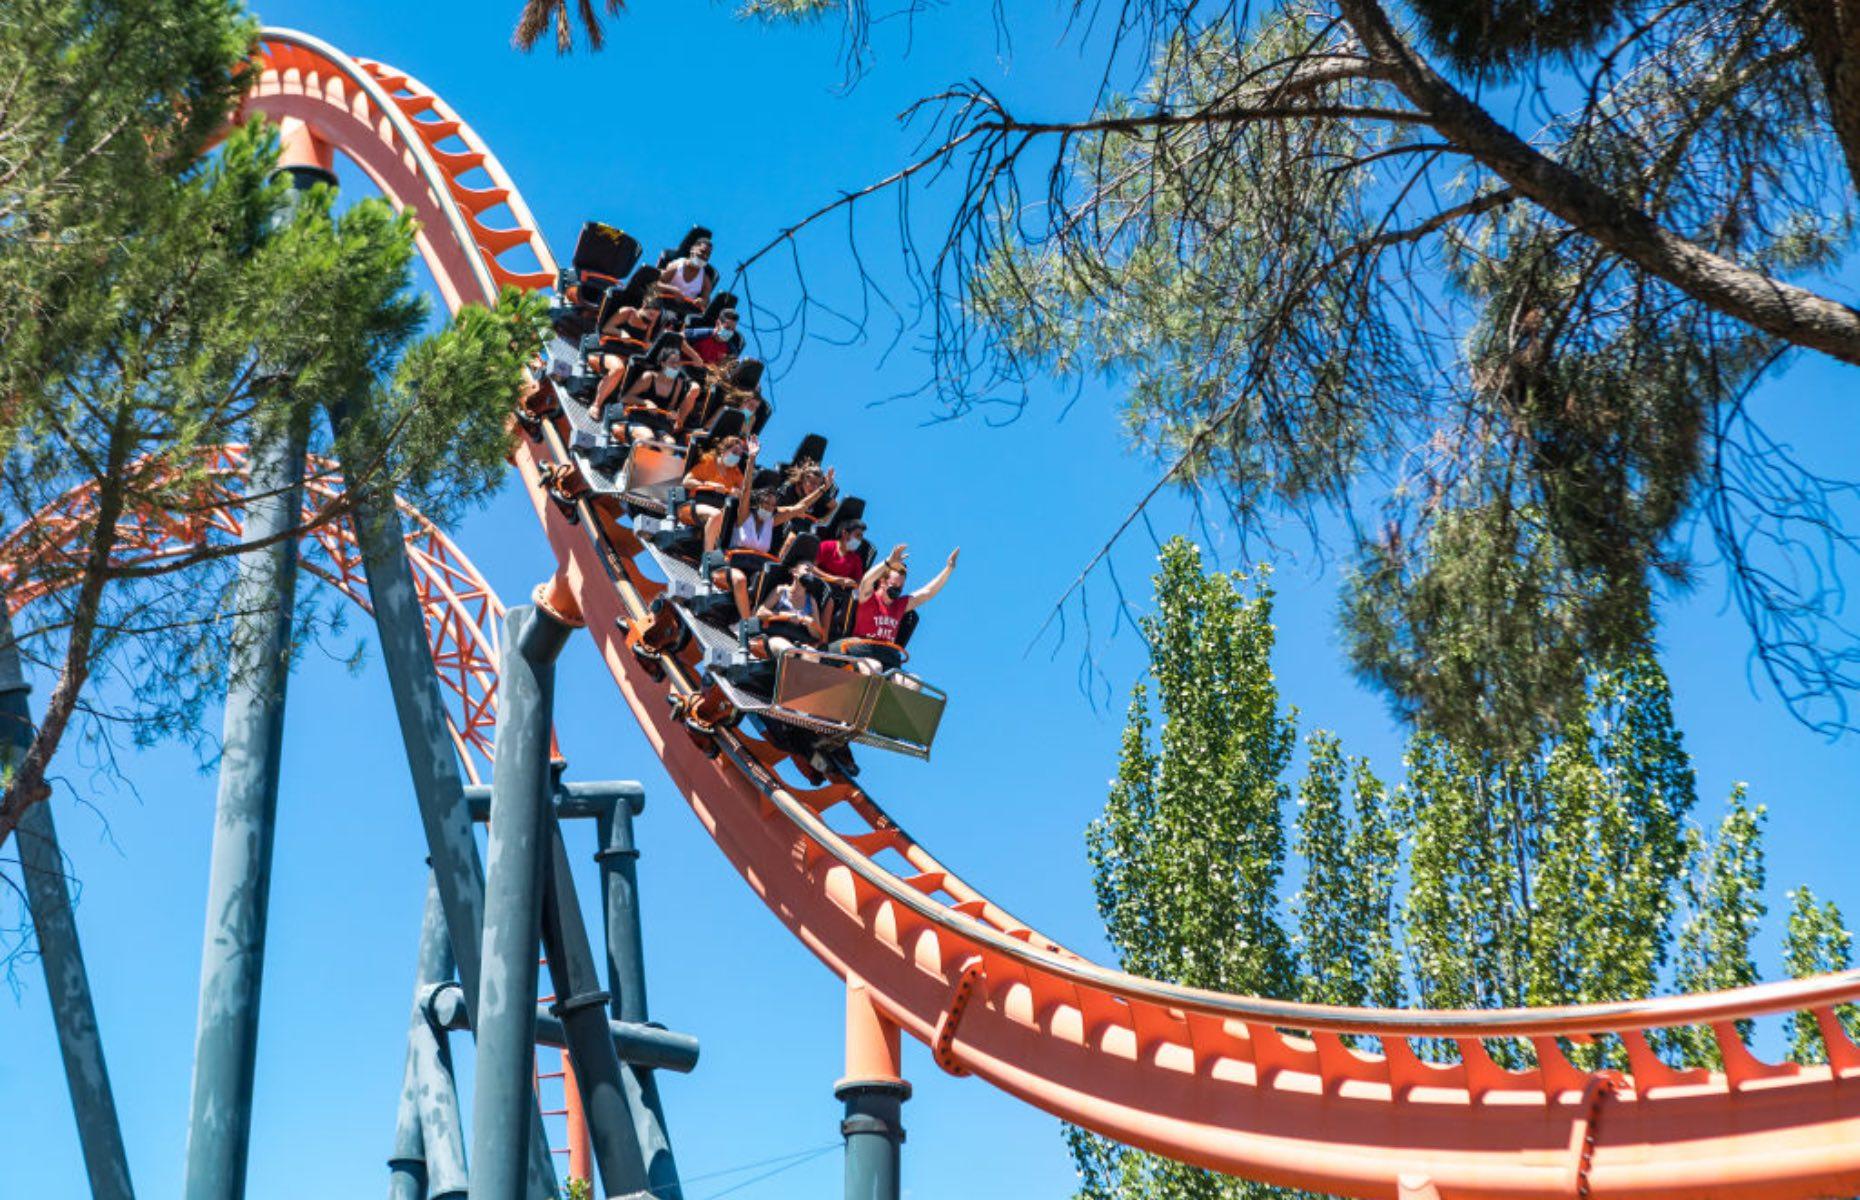 <p>Valravn opened in 2016 and is a record-breaking floorless coaster. Riders' feet dangle about as they whizz 223 feet in the air, the coaster then pauses for four scary seconds before it bombs down a 90° drop. When it opened it held the records for tallest, fastest, and longest dive roller coaster, before Canada's Yukon Striker took over in 2019.</p>